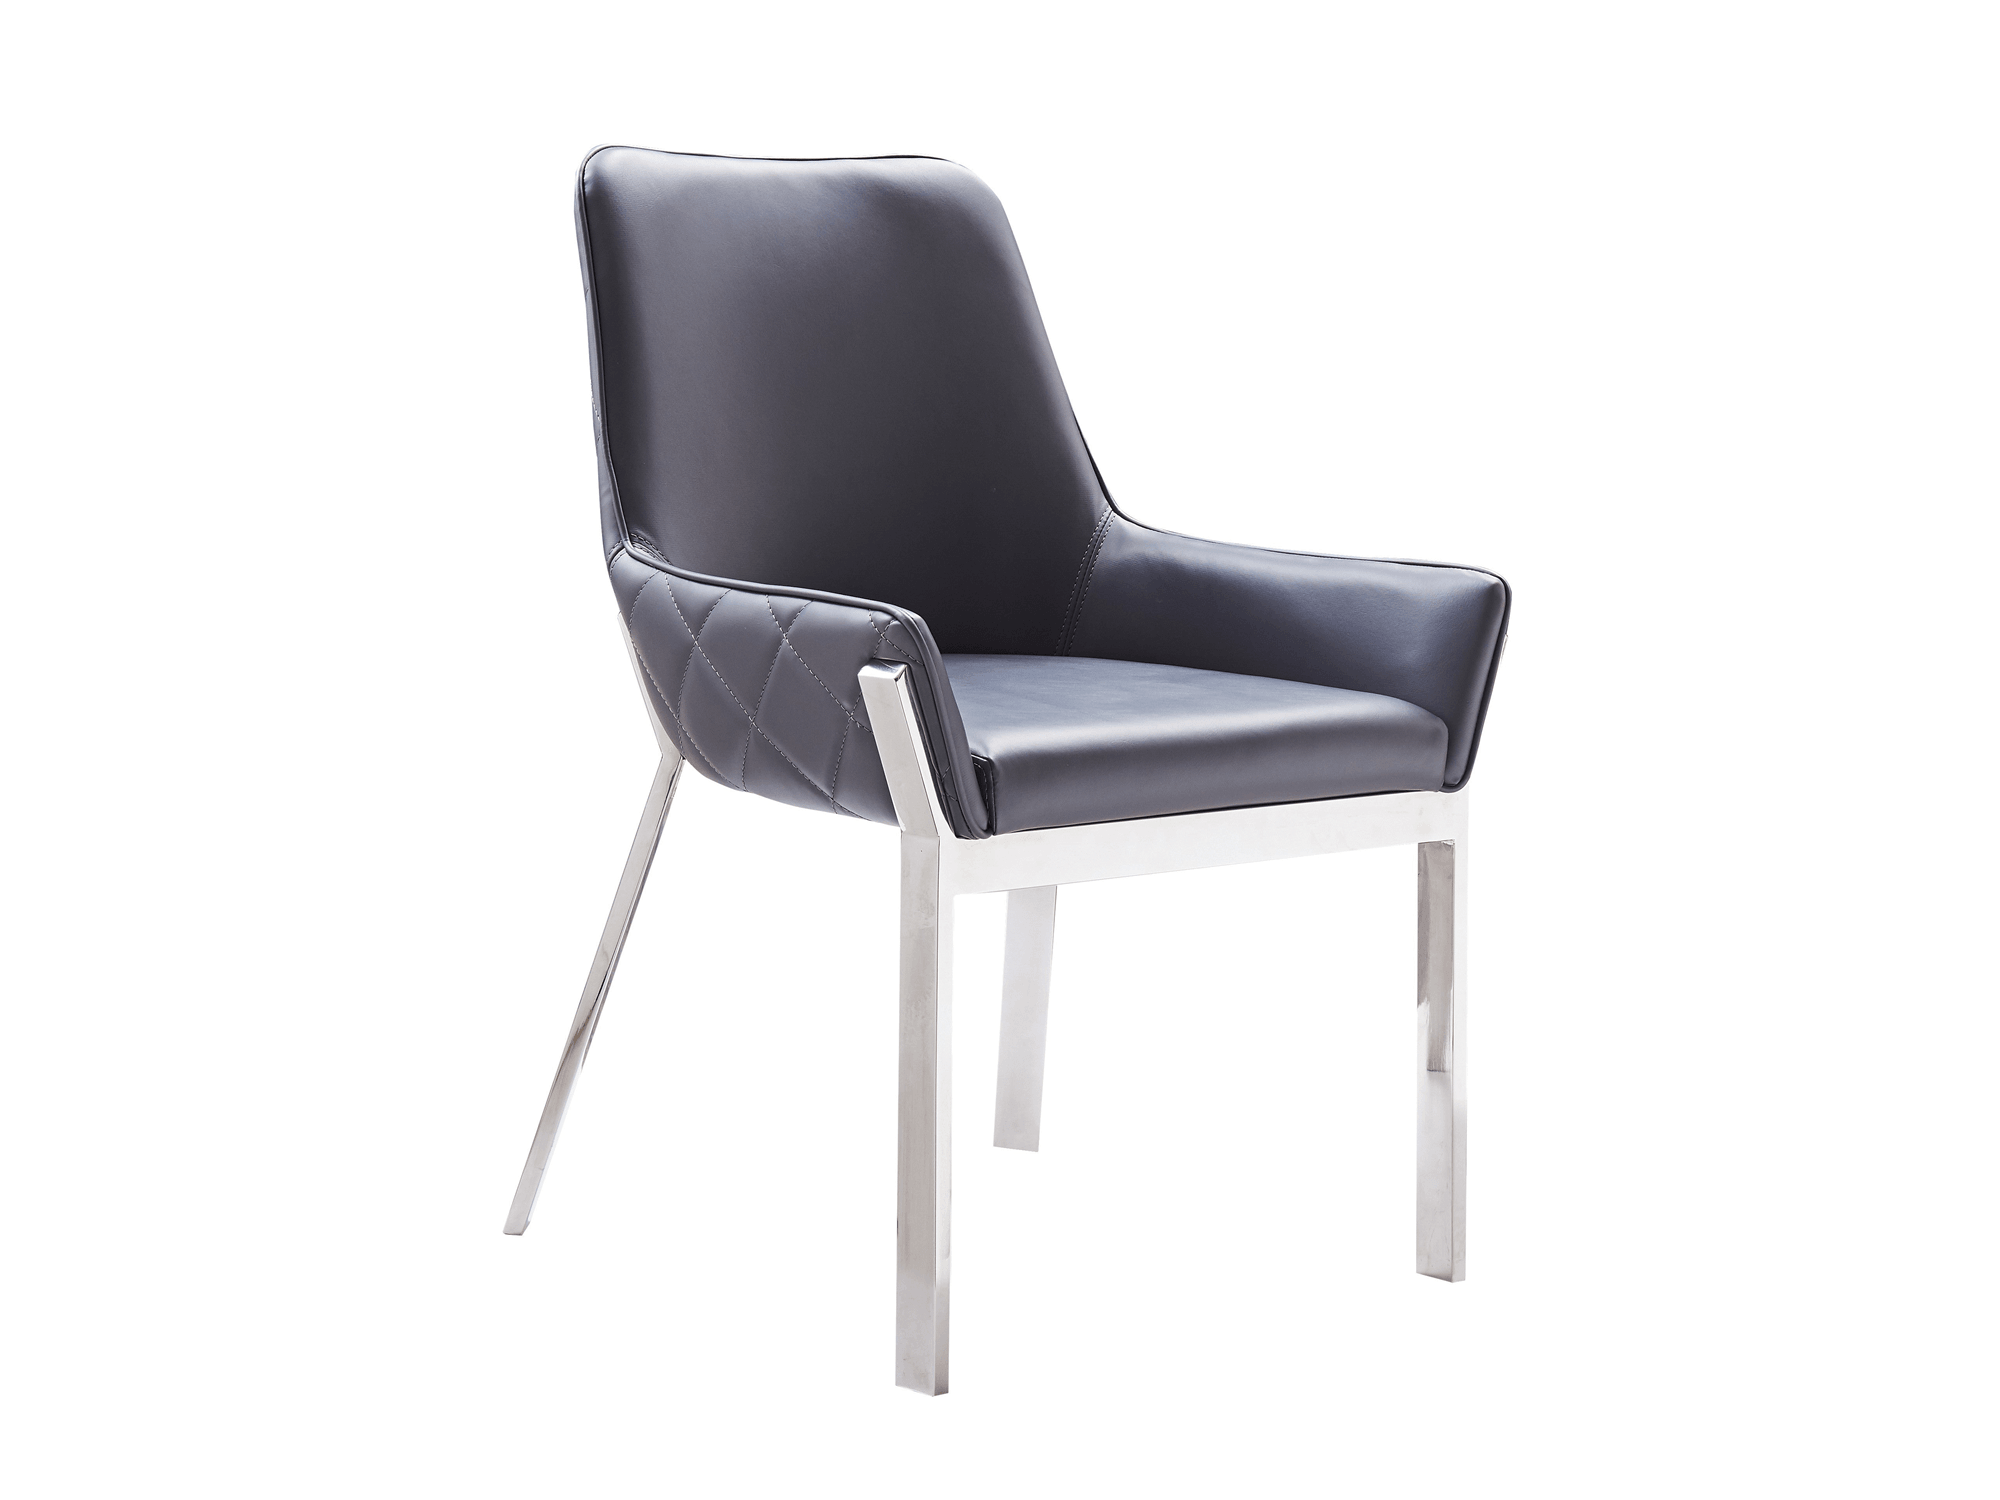 Premier Dining Chair in Grey - Euro Living Furniture